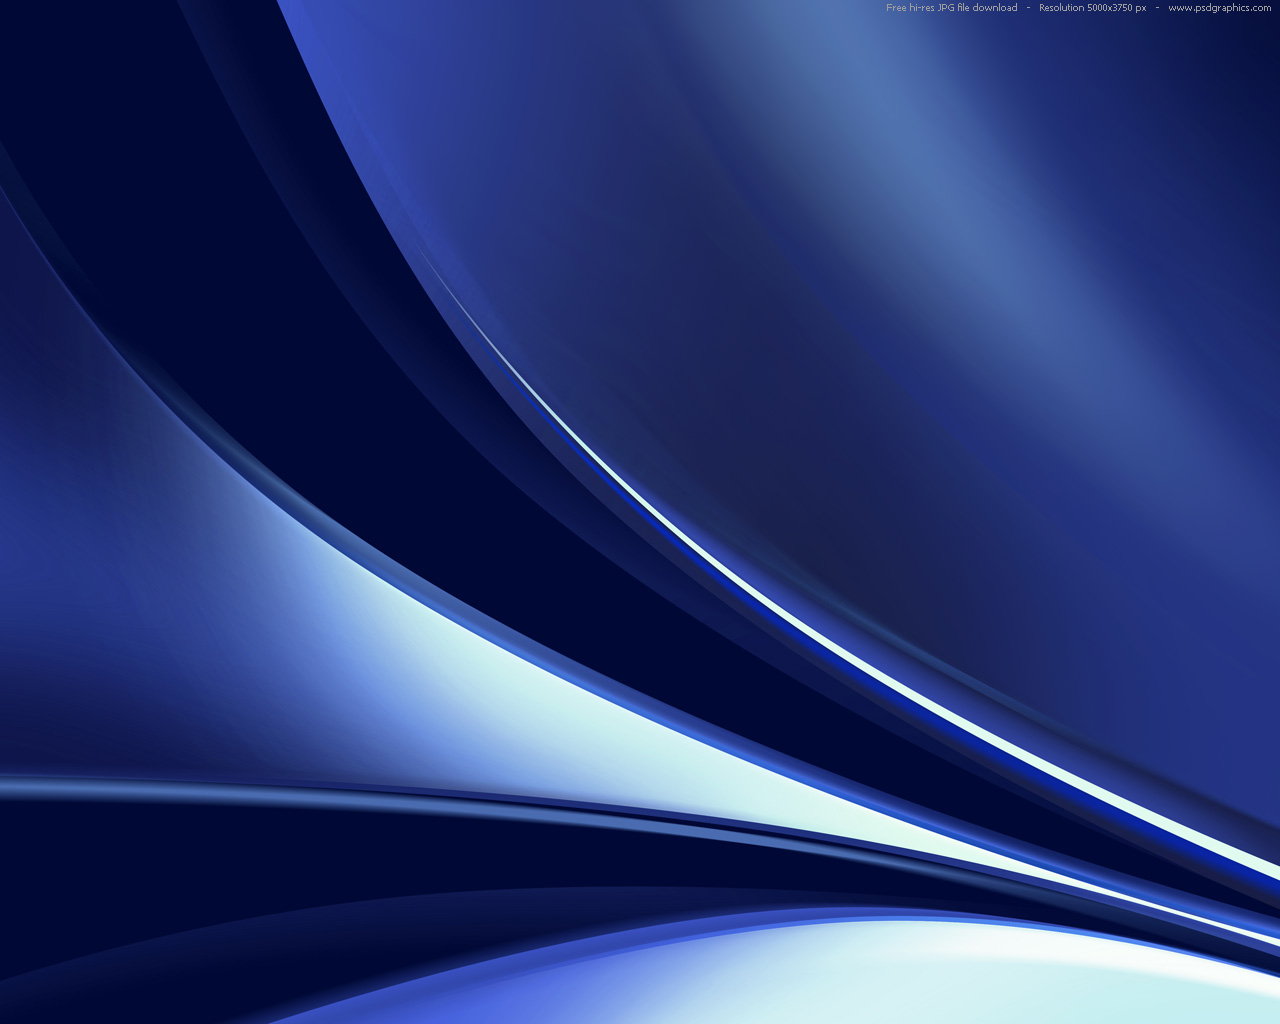 Blue Abstract Backgrounds Art Free Vector